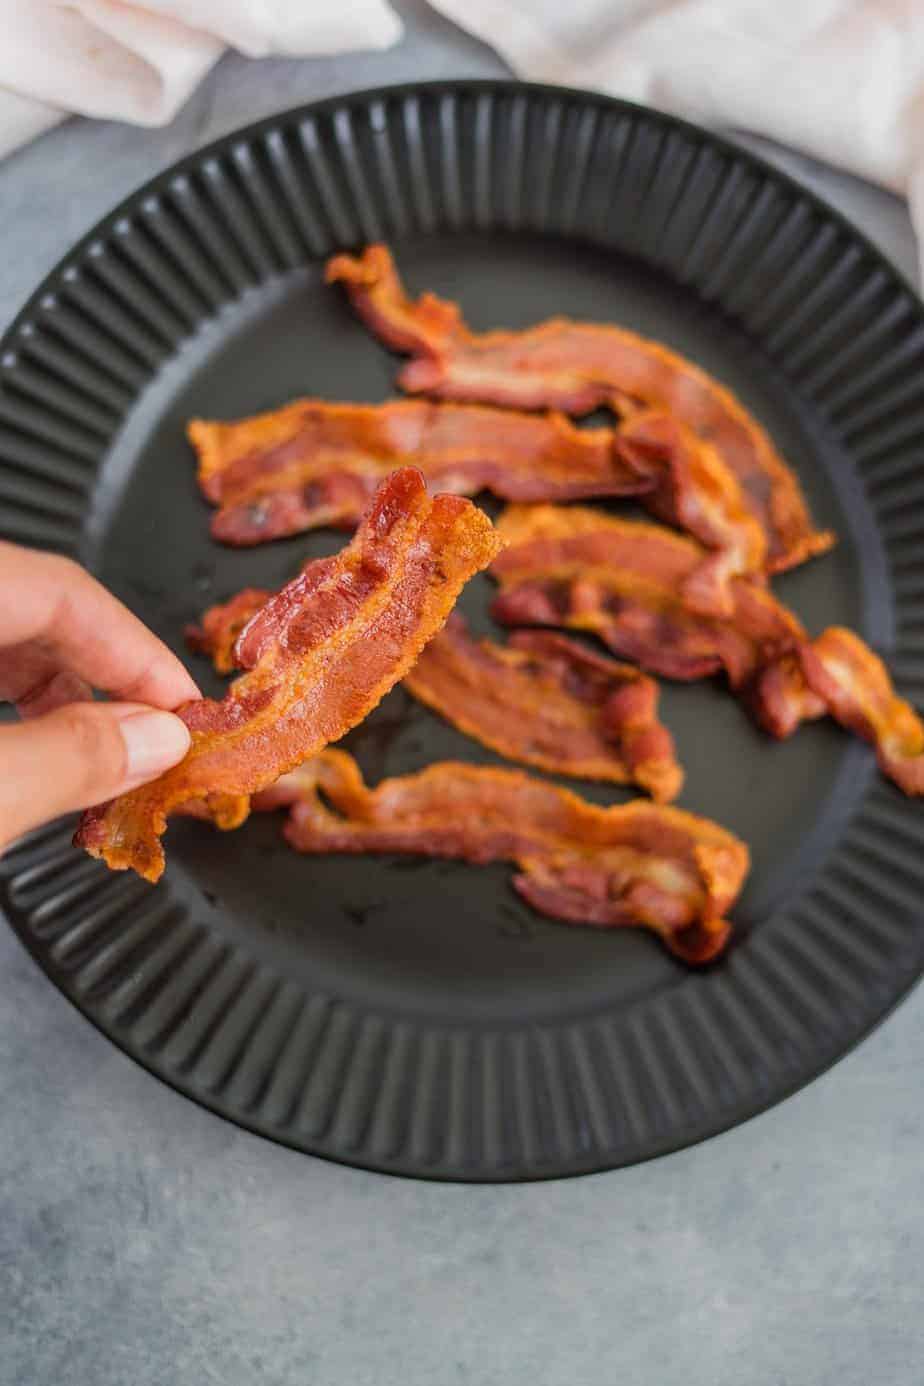 How To Fry Bacon